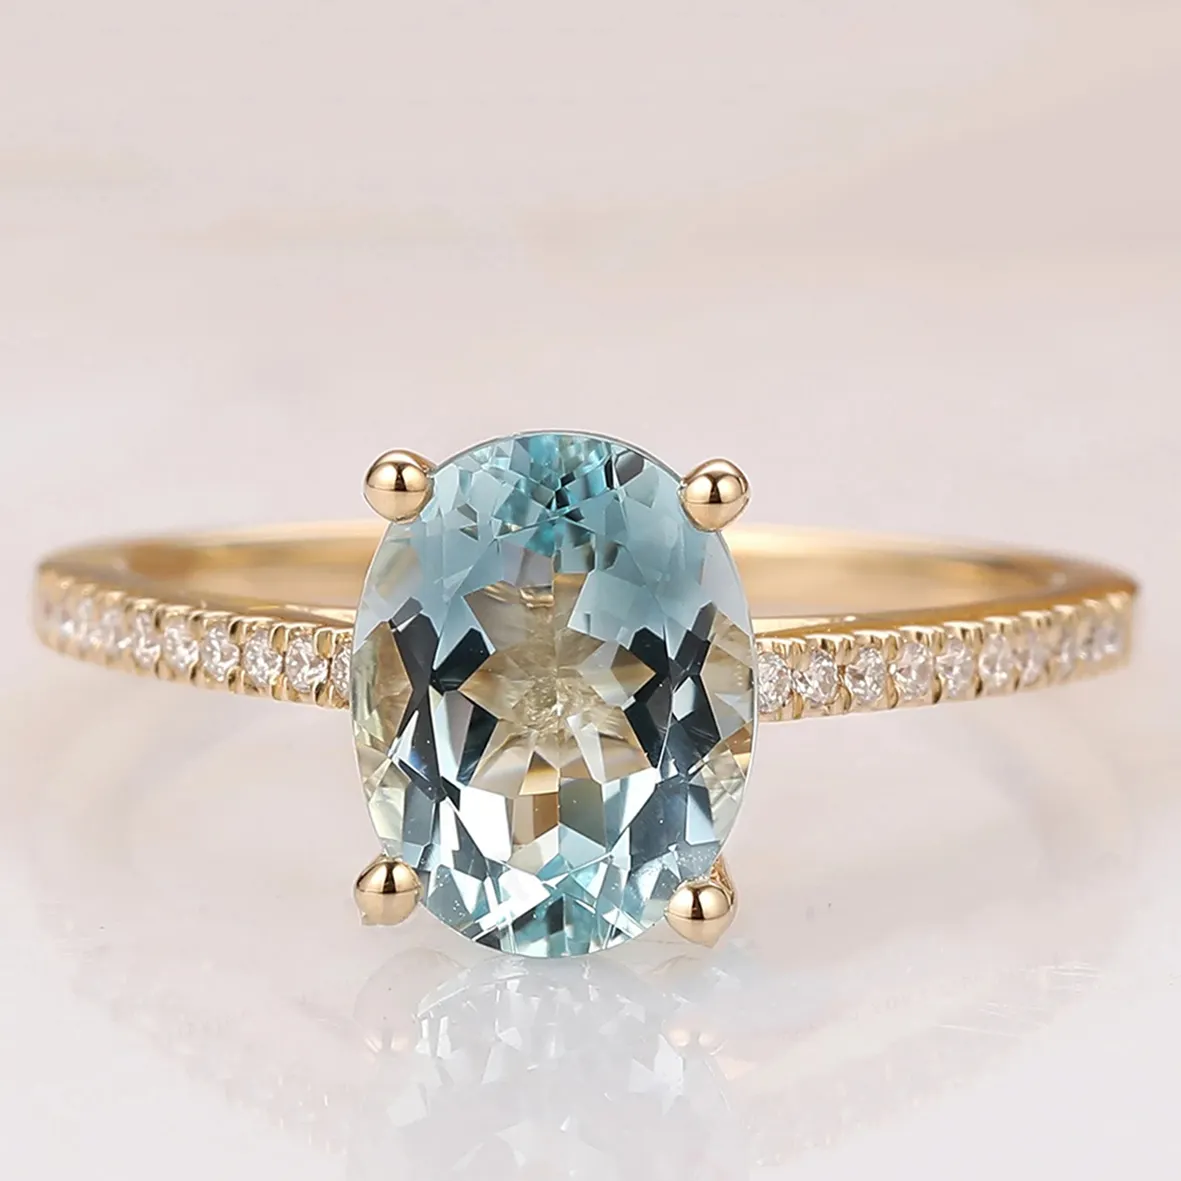 14K Gold Sterling Silver Jewelry Natural Oval Cut Aquamarine Raw Ring CZ Fashion Engagement Ring